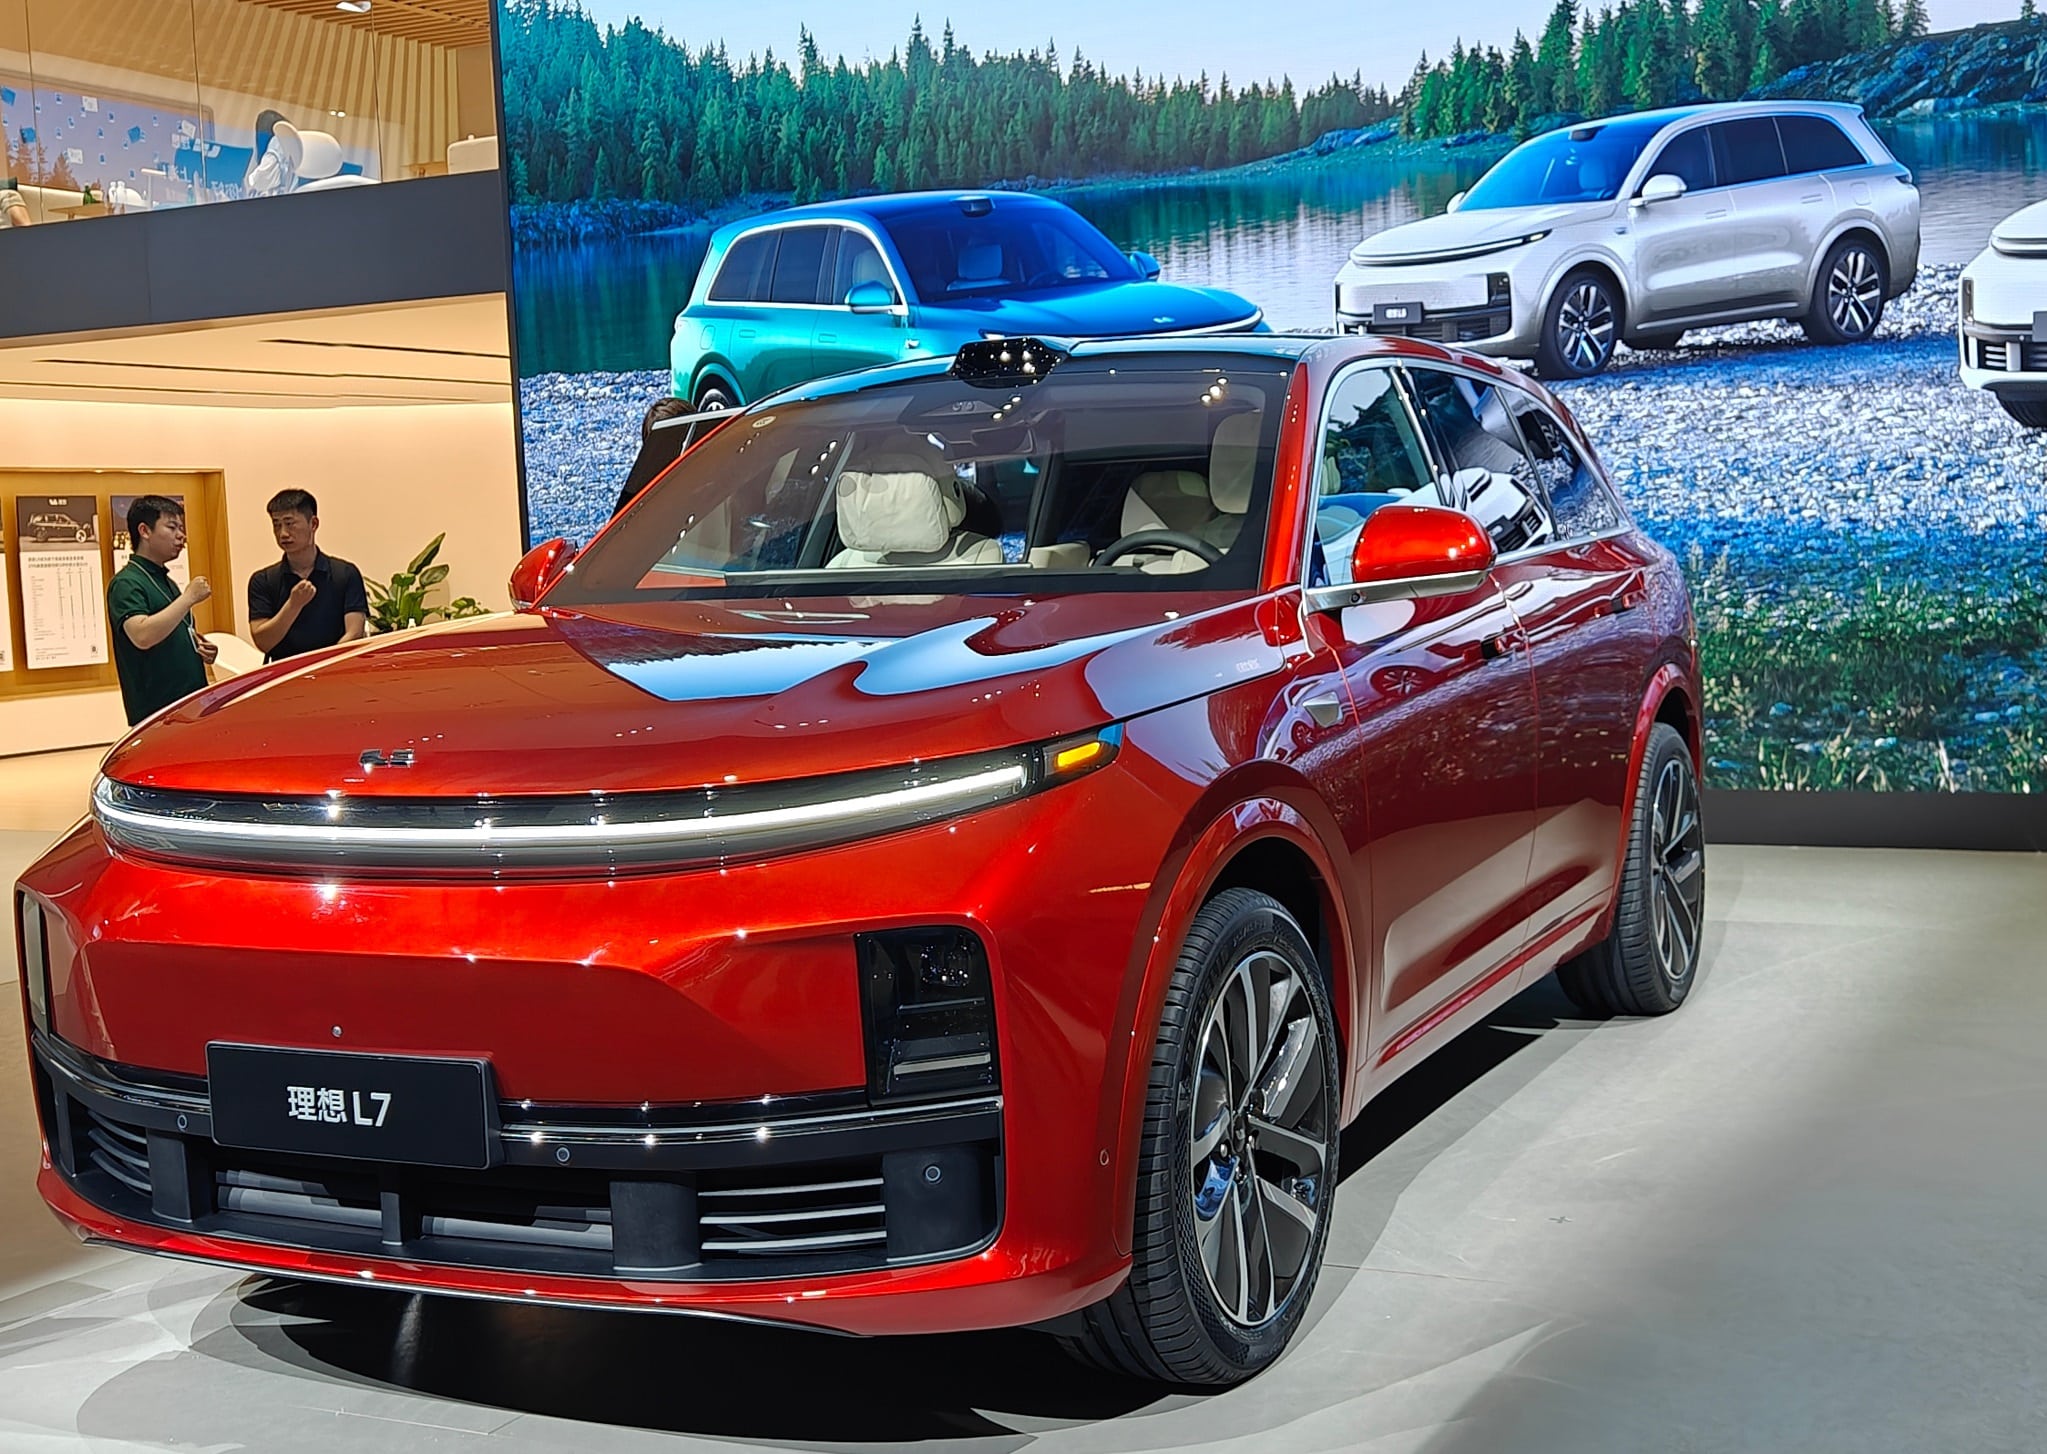 Li Auto's first pure EV will get CATL's Qilin battery. To launch 5